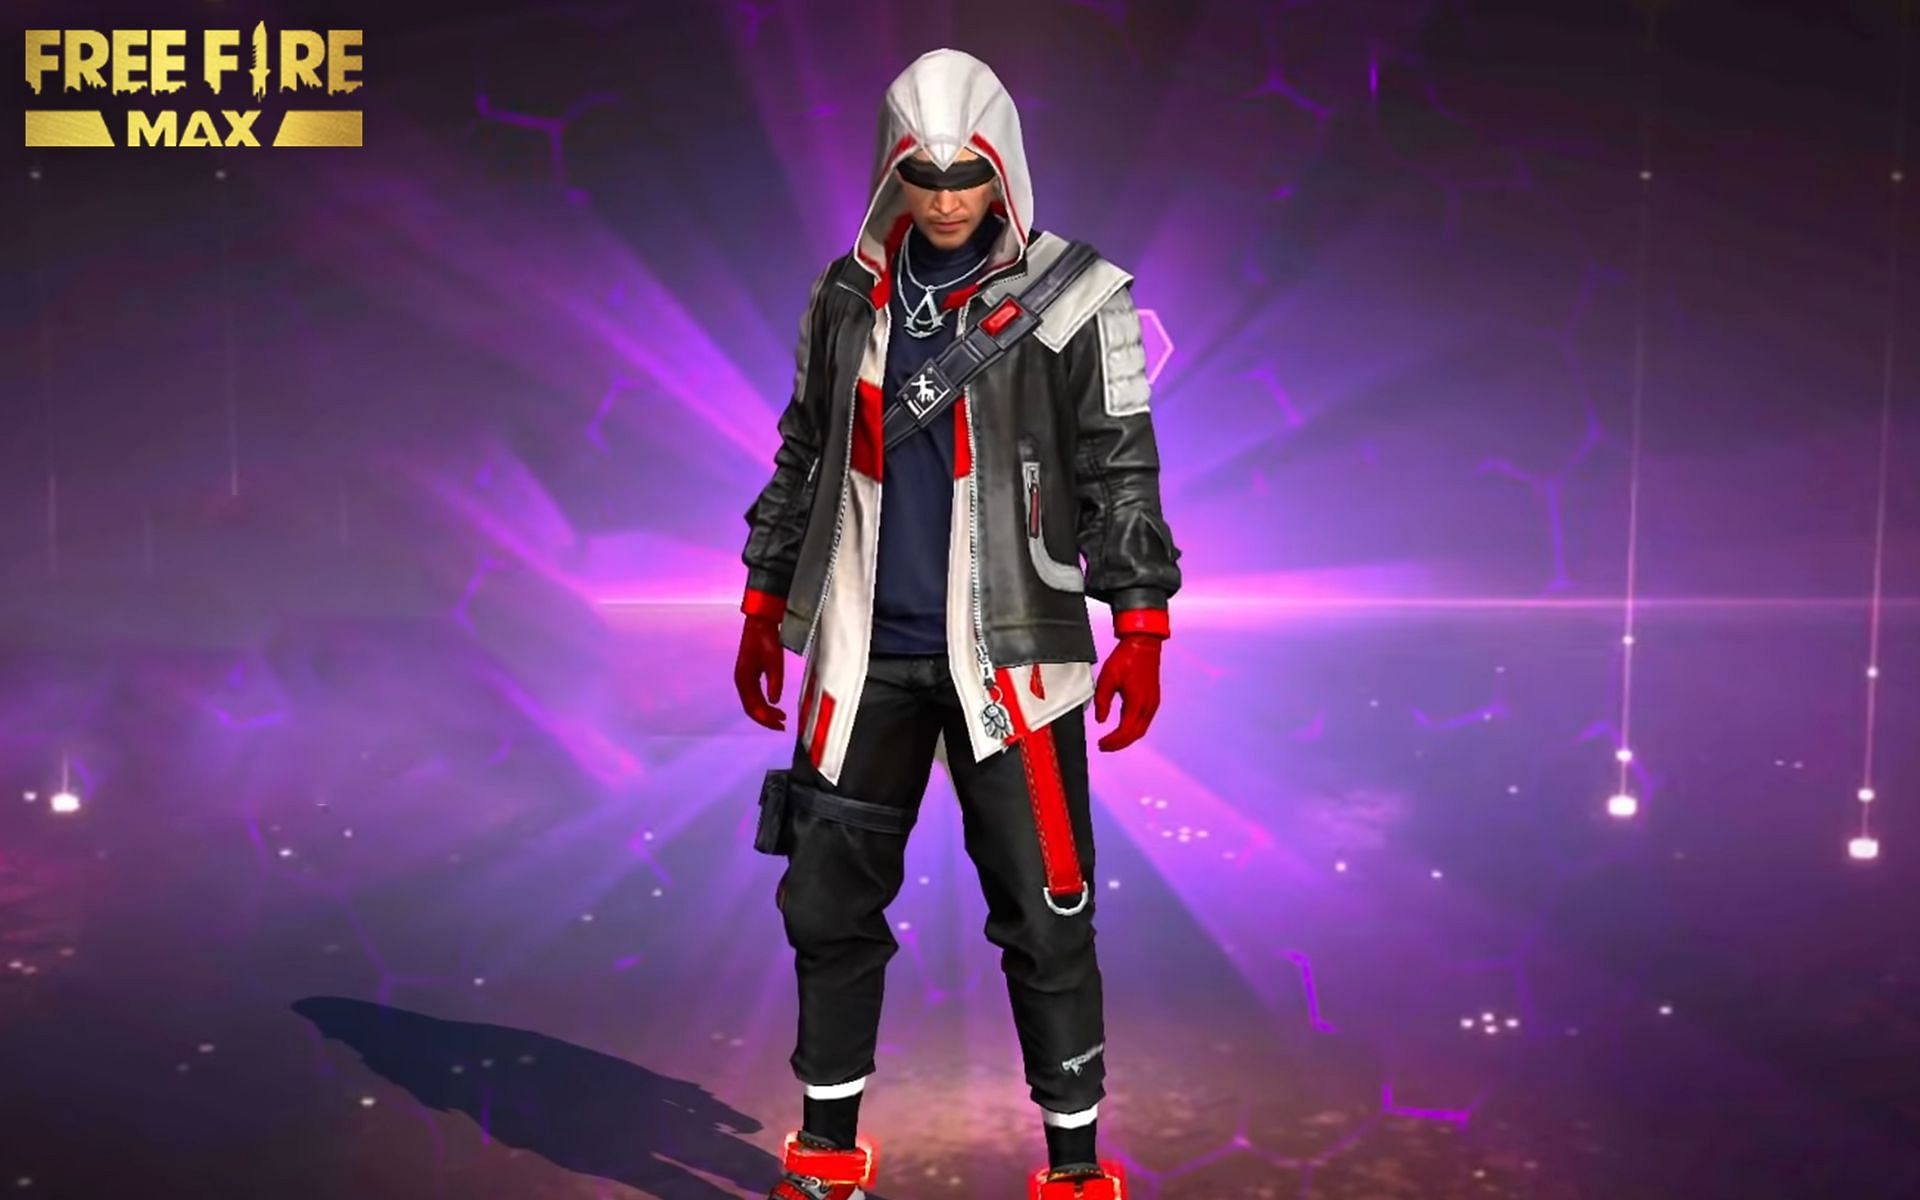 This is the new costume added by the developers (Image via Garena)